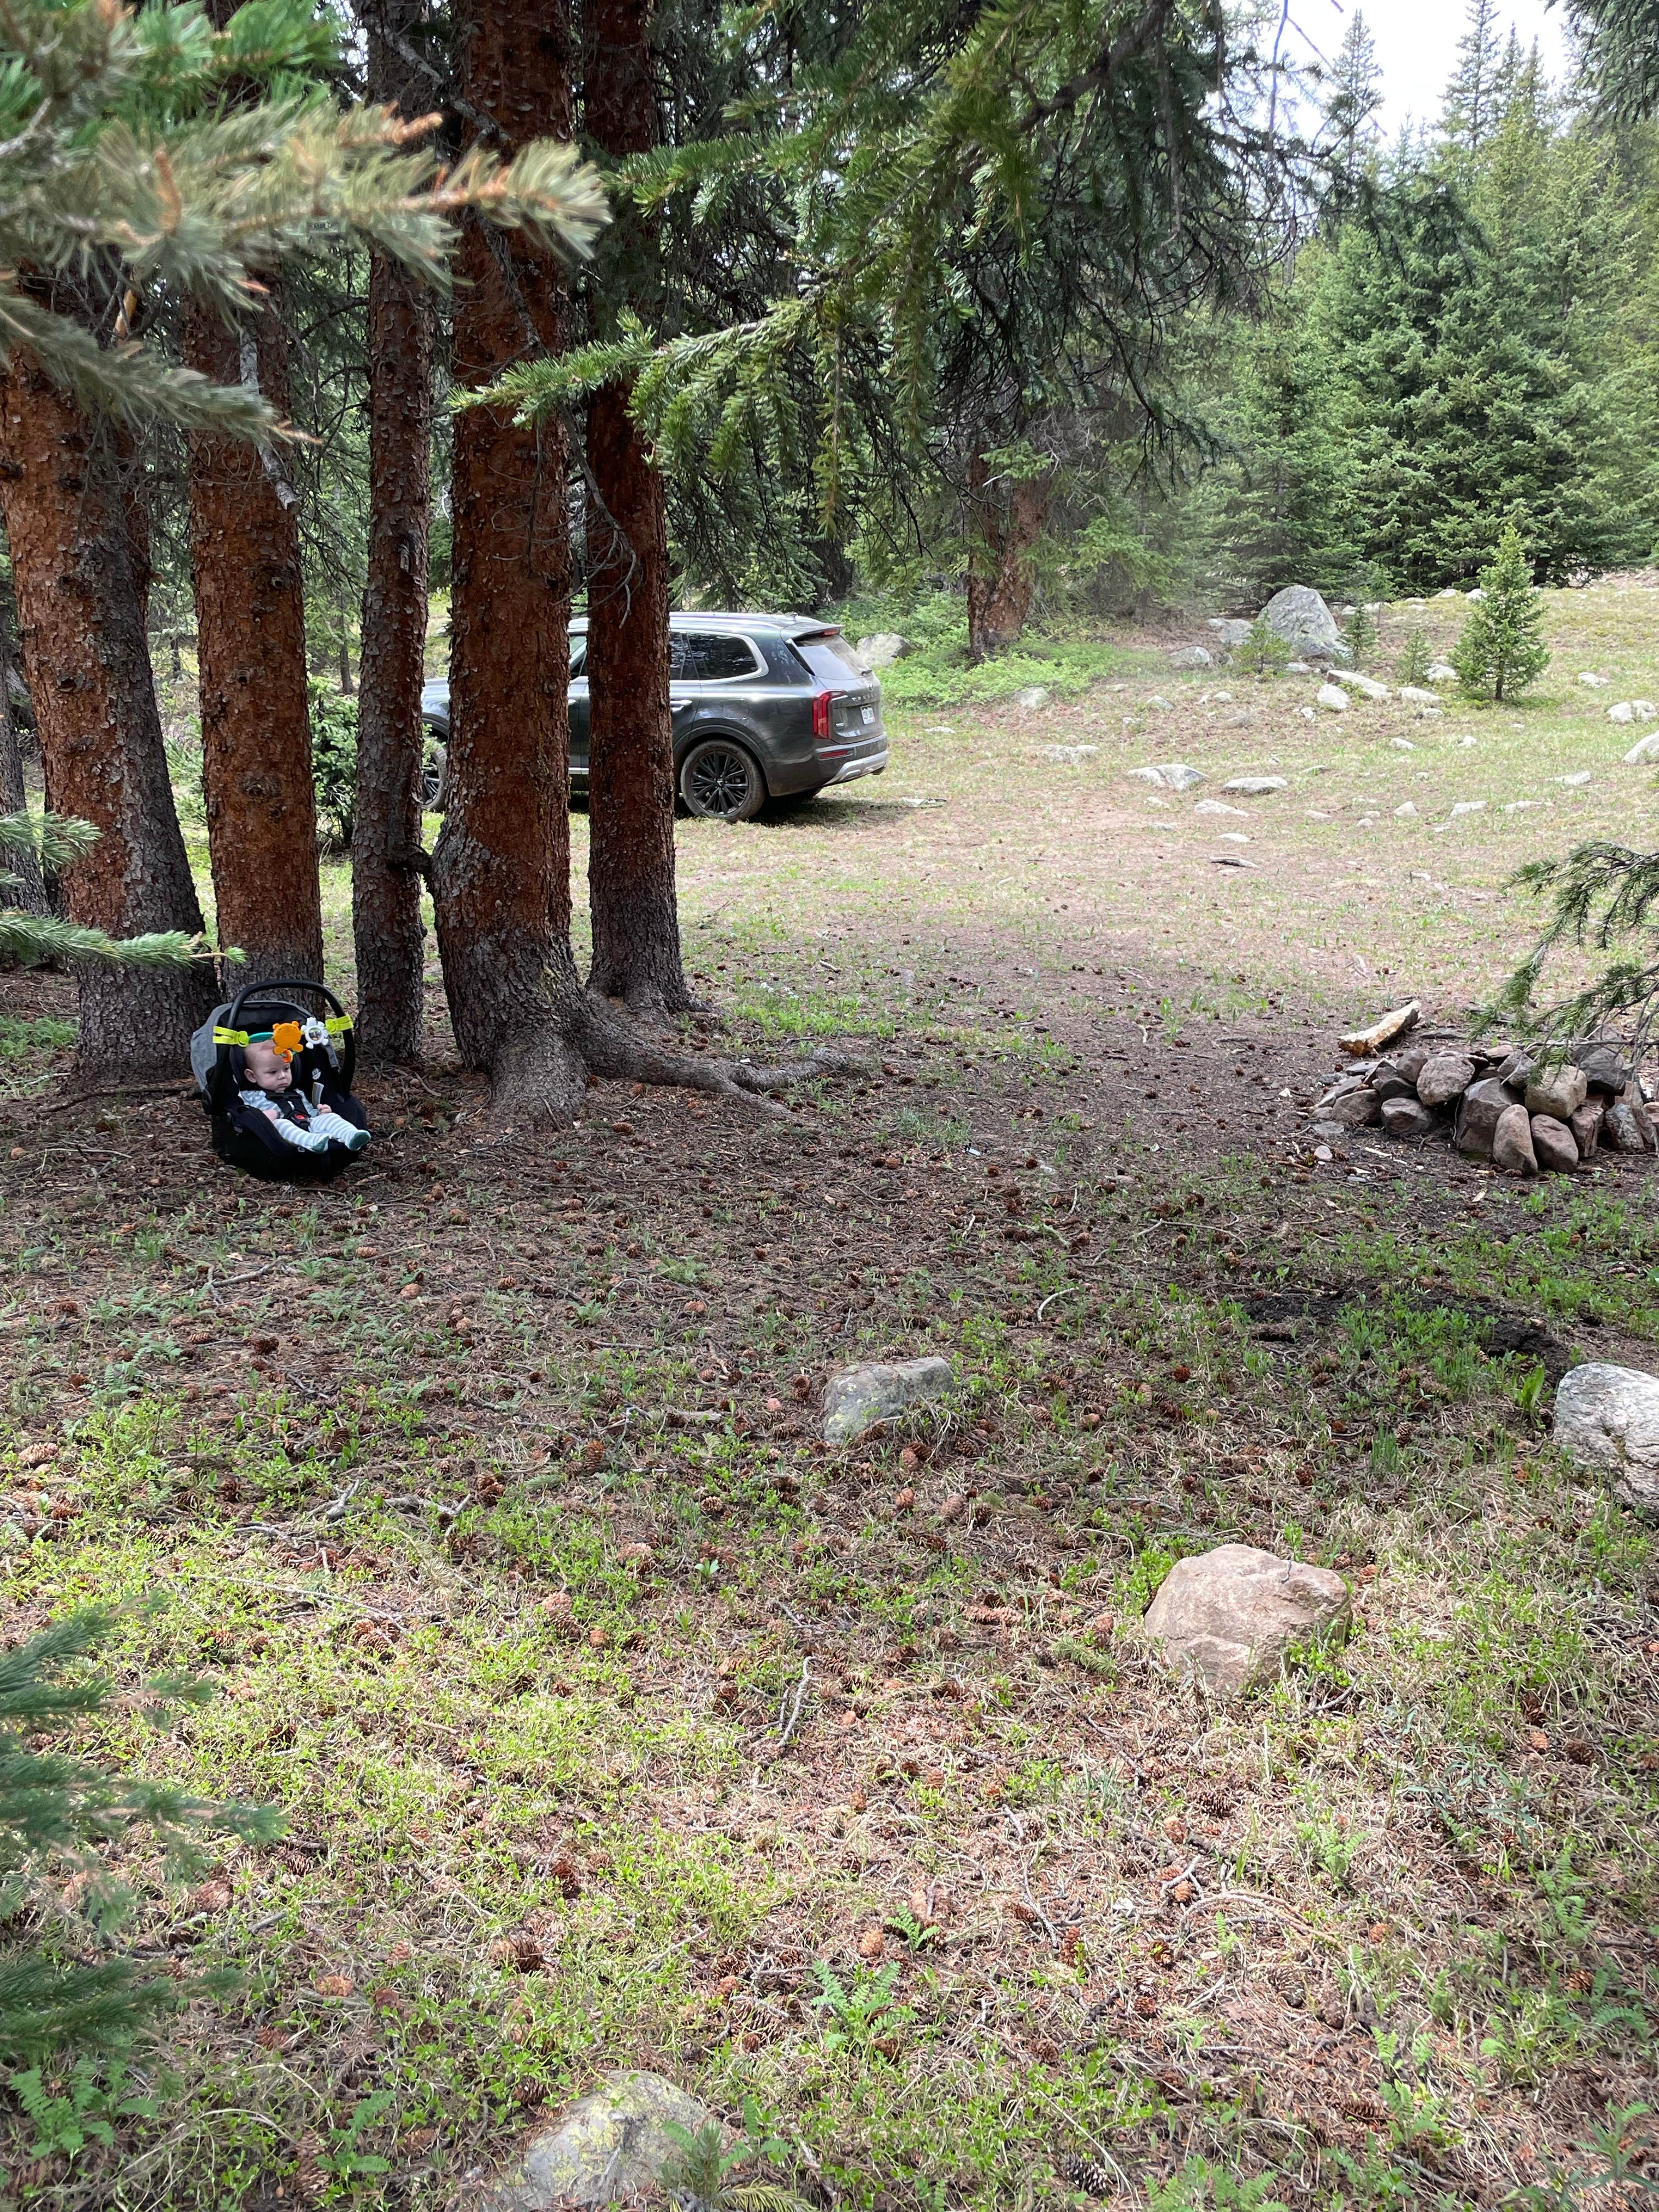 Camper submitted image from Saints John Trail Roadside Campsites - 2